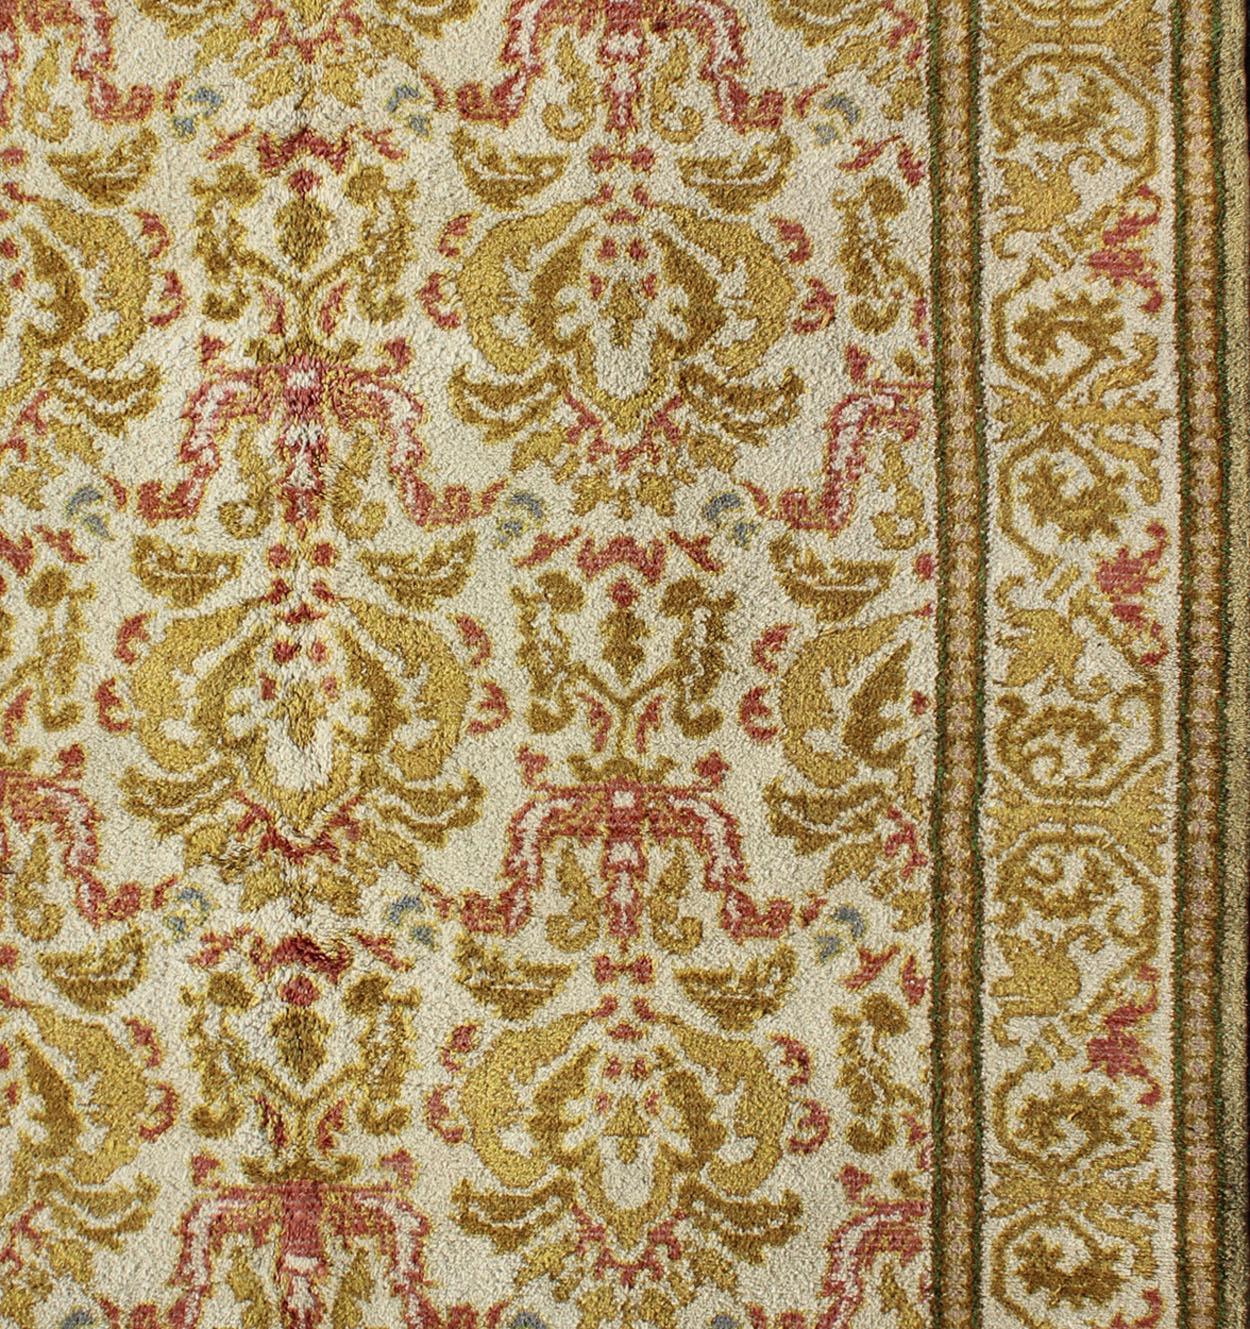 Elegant antique Spanish rug with floral design in light brown, acid green, yellow green, coral and white. Rug 16-0924, country of origin / type: Spain / Arts & Crafts, circa 1930

This elegant Spanish carpet (circa 1930) is the proud heir to a